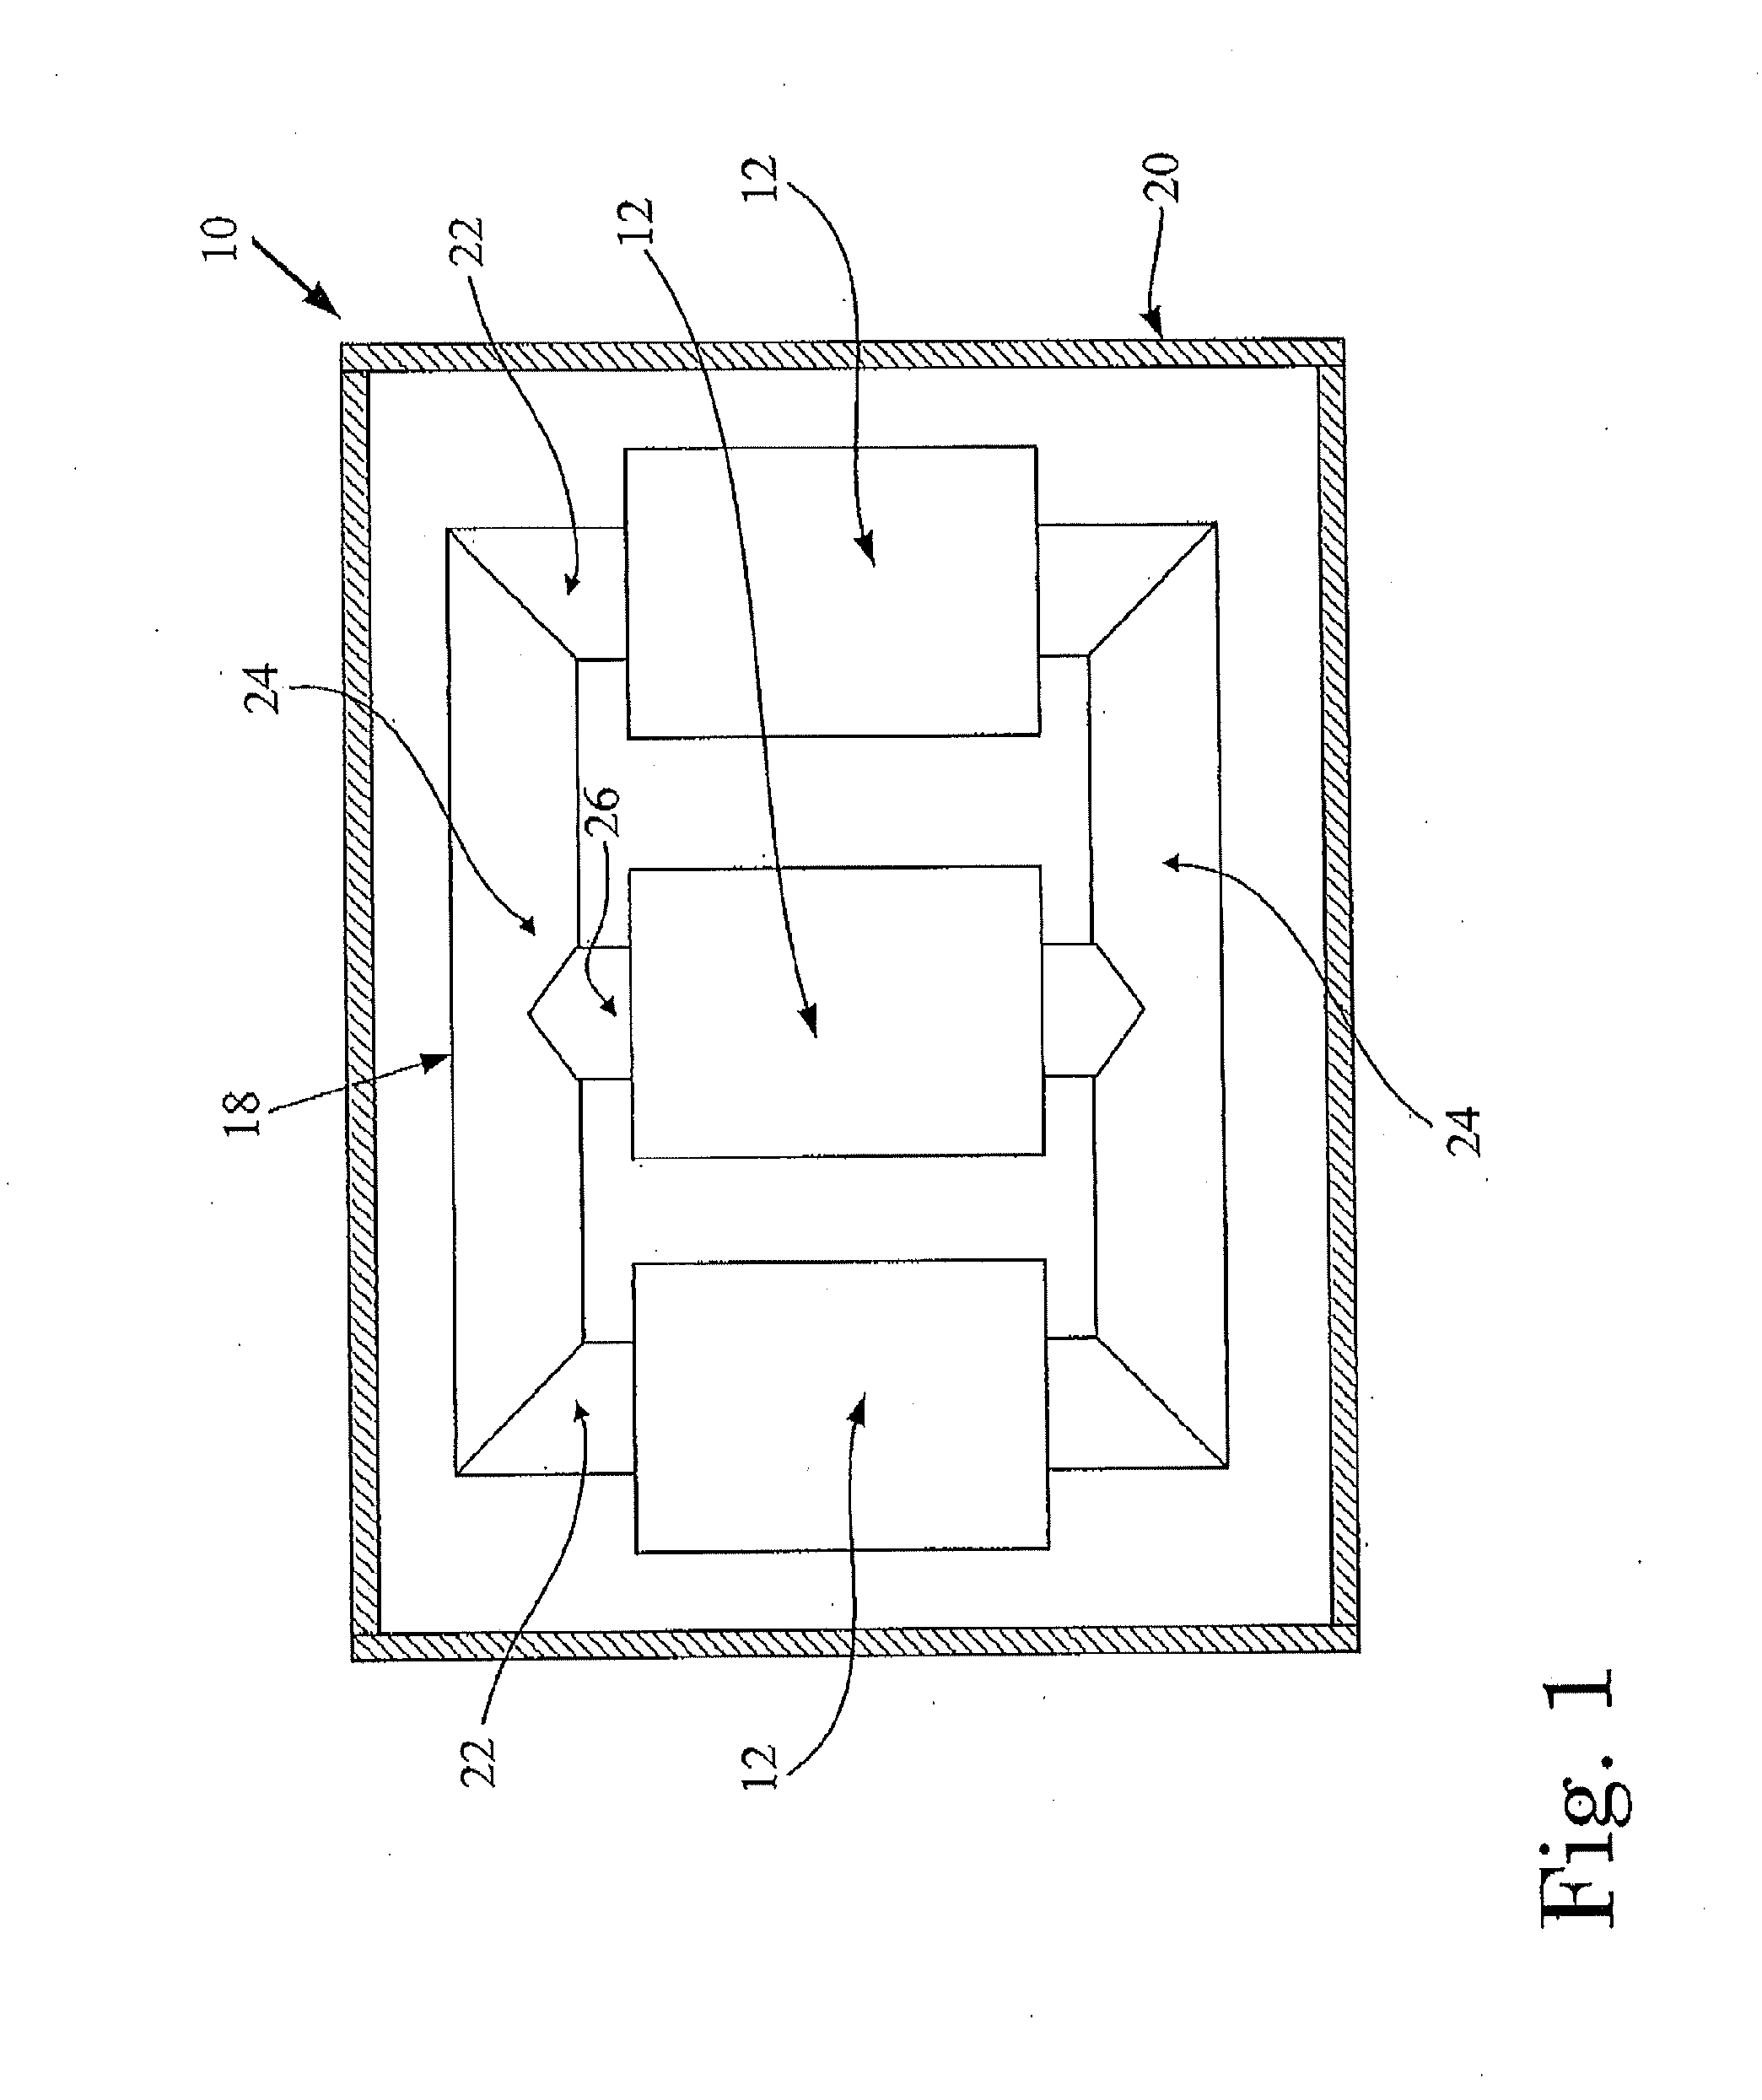 Dry-type transformer and method of manufacturing a dry-type transformer